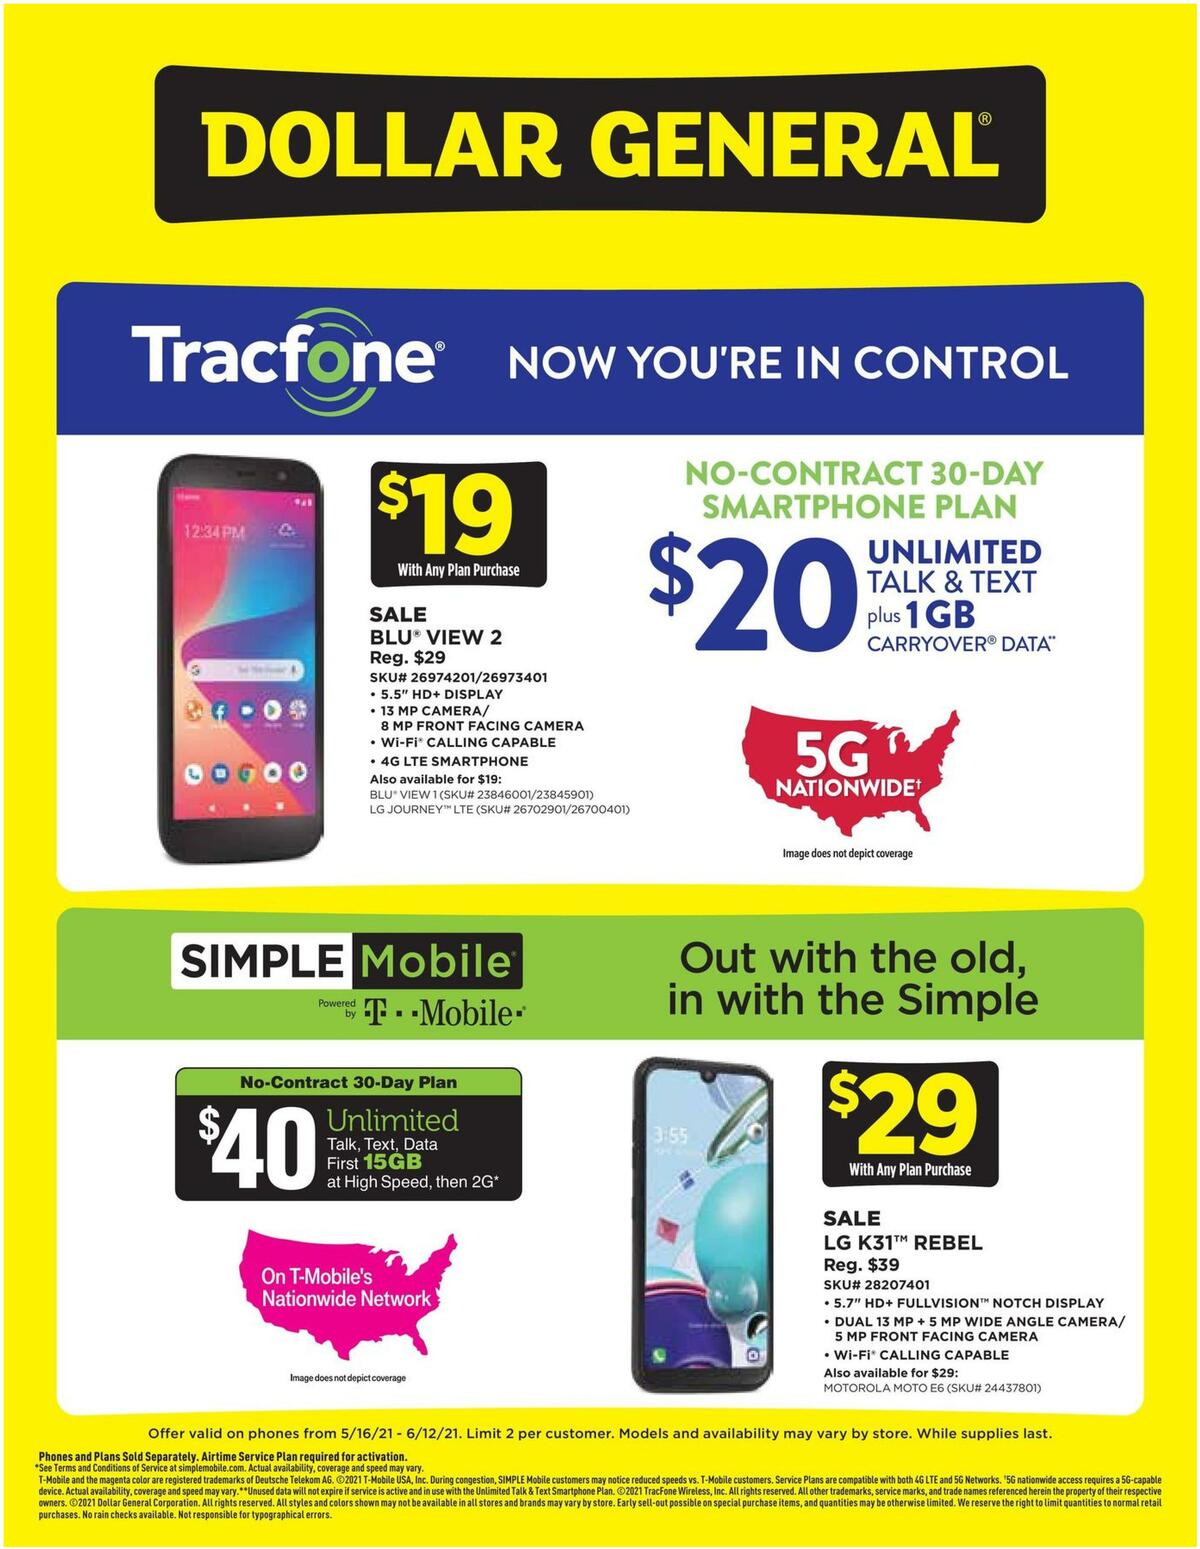 Dollar General Weekly Wireless Specials Weekly Ad from May 16